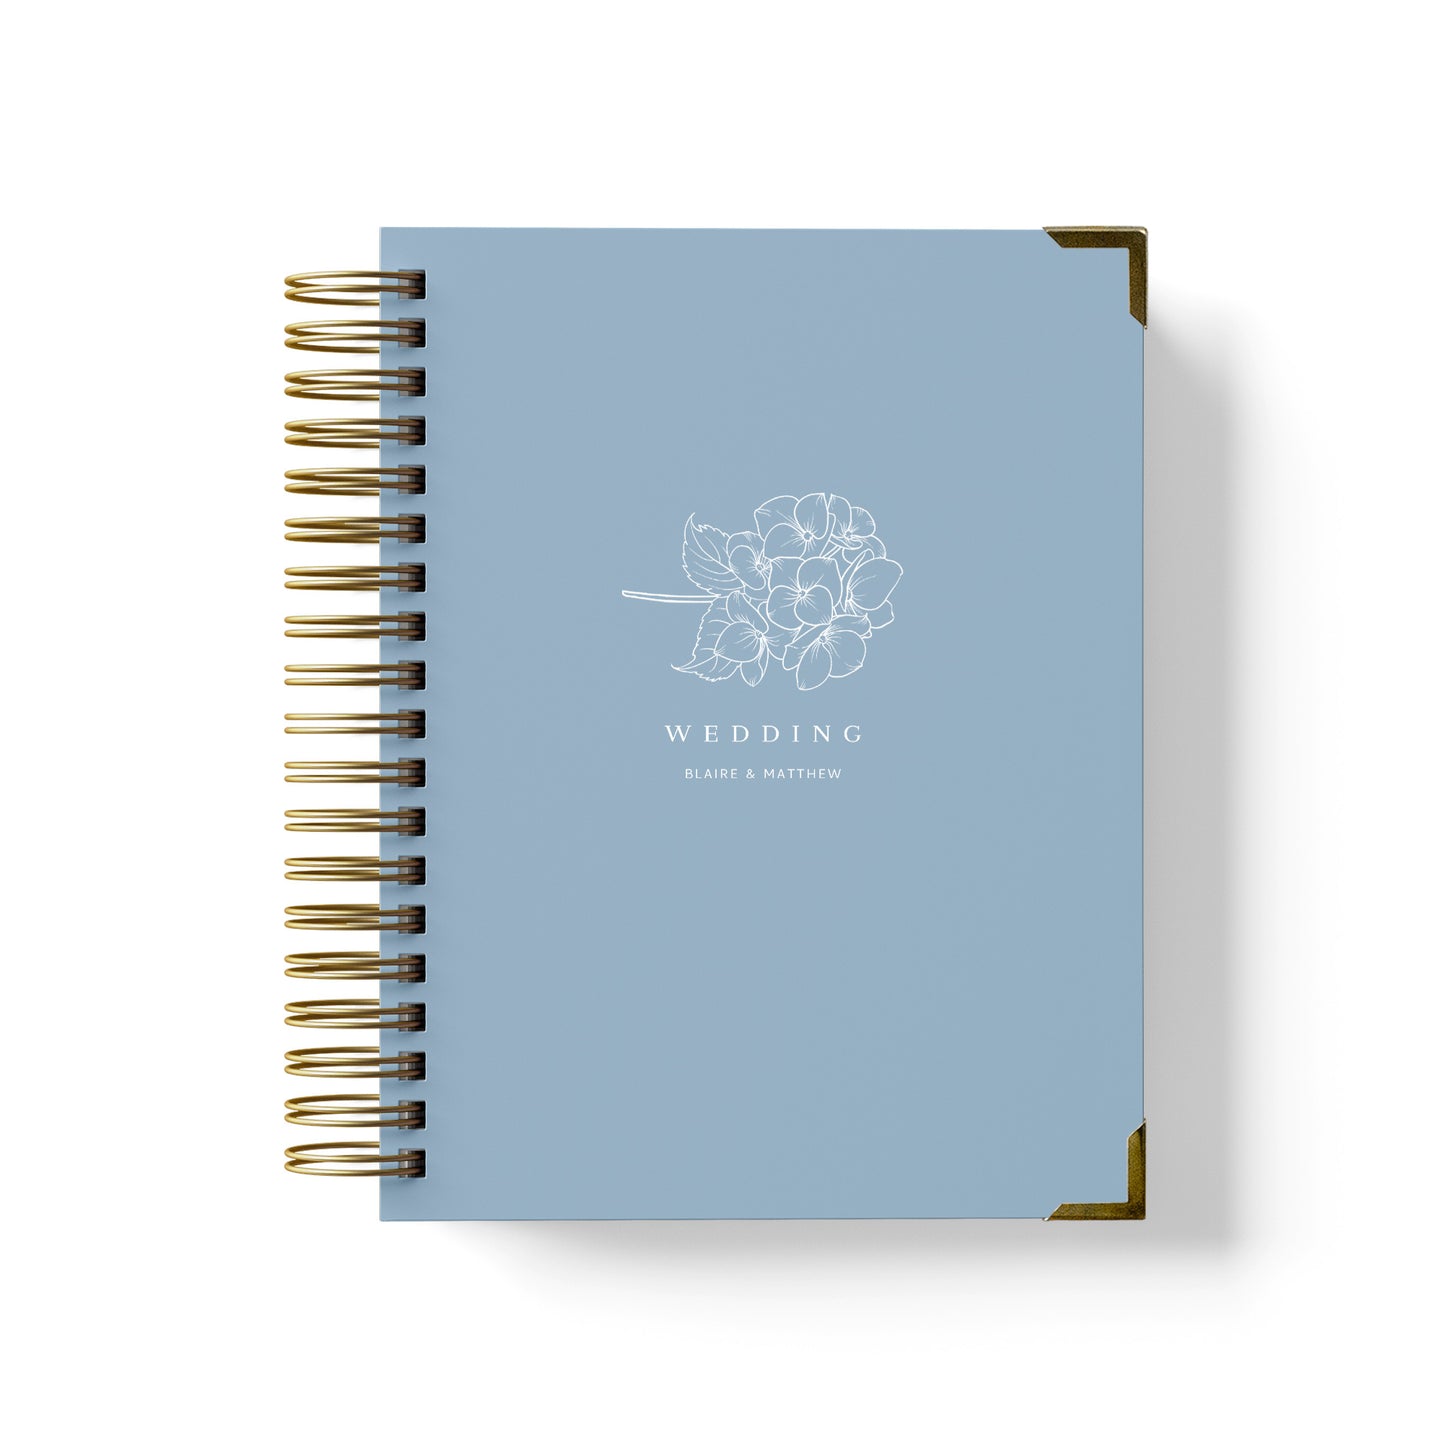 Our luxury wedding planner books are the best a bride can buy, featured in a hydrangea design